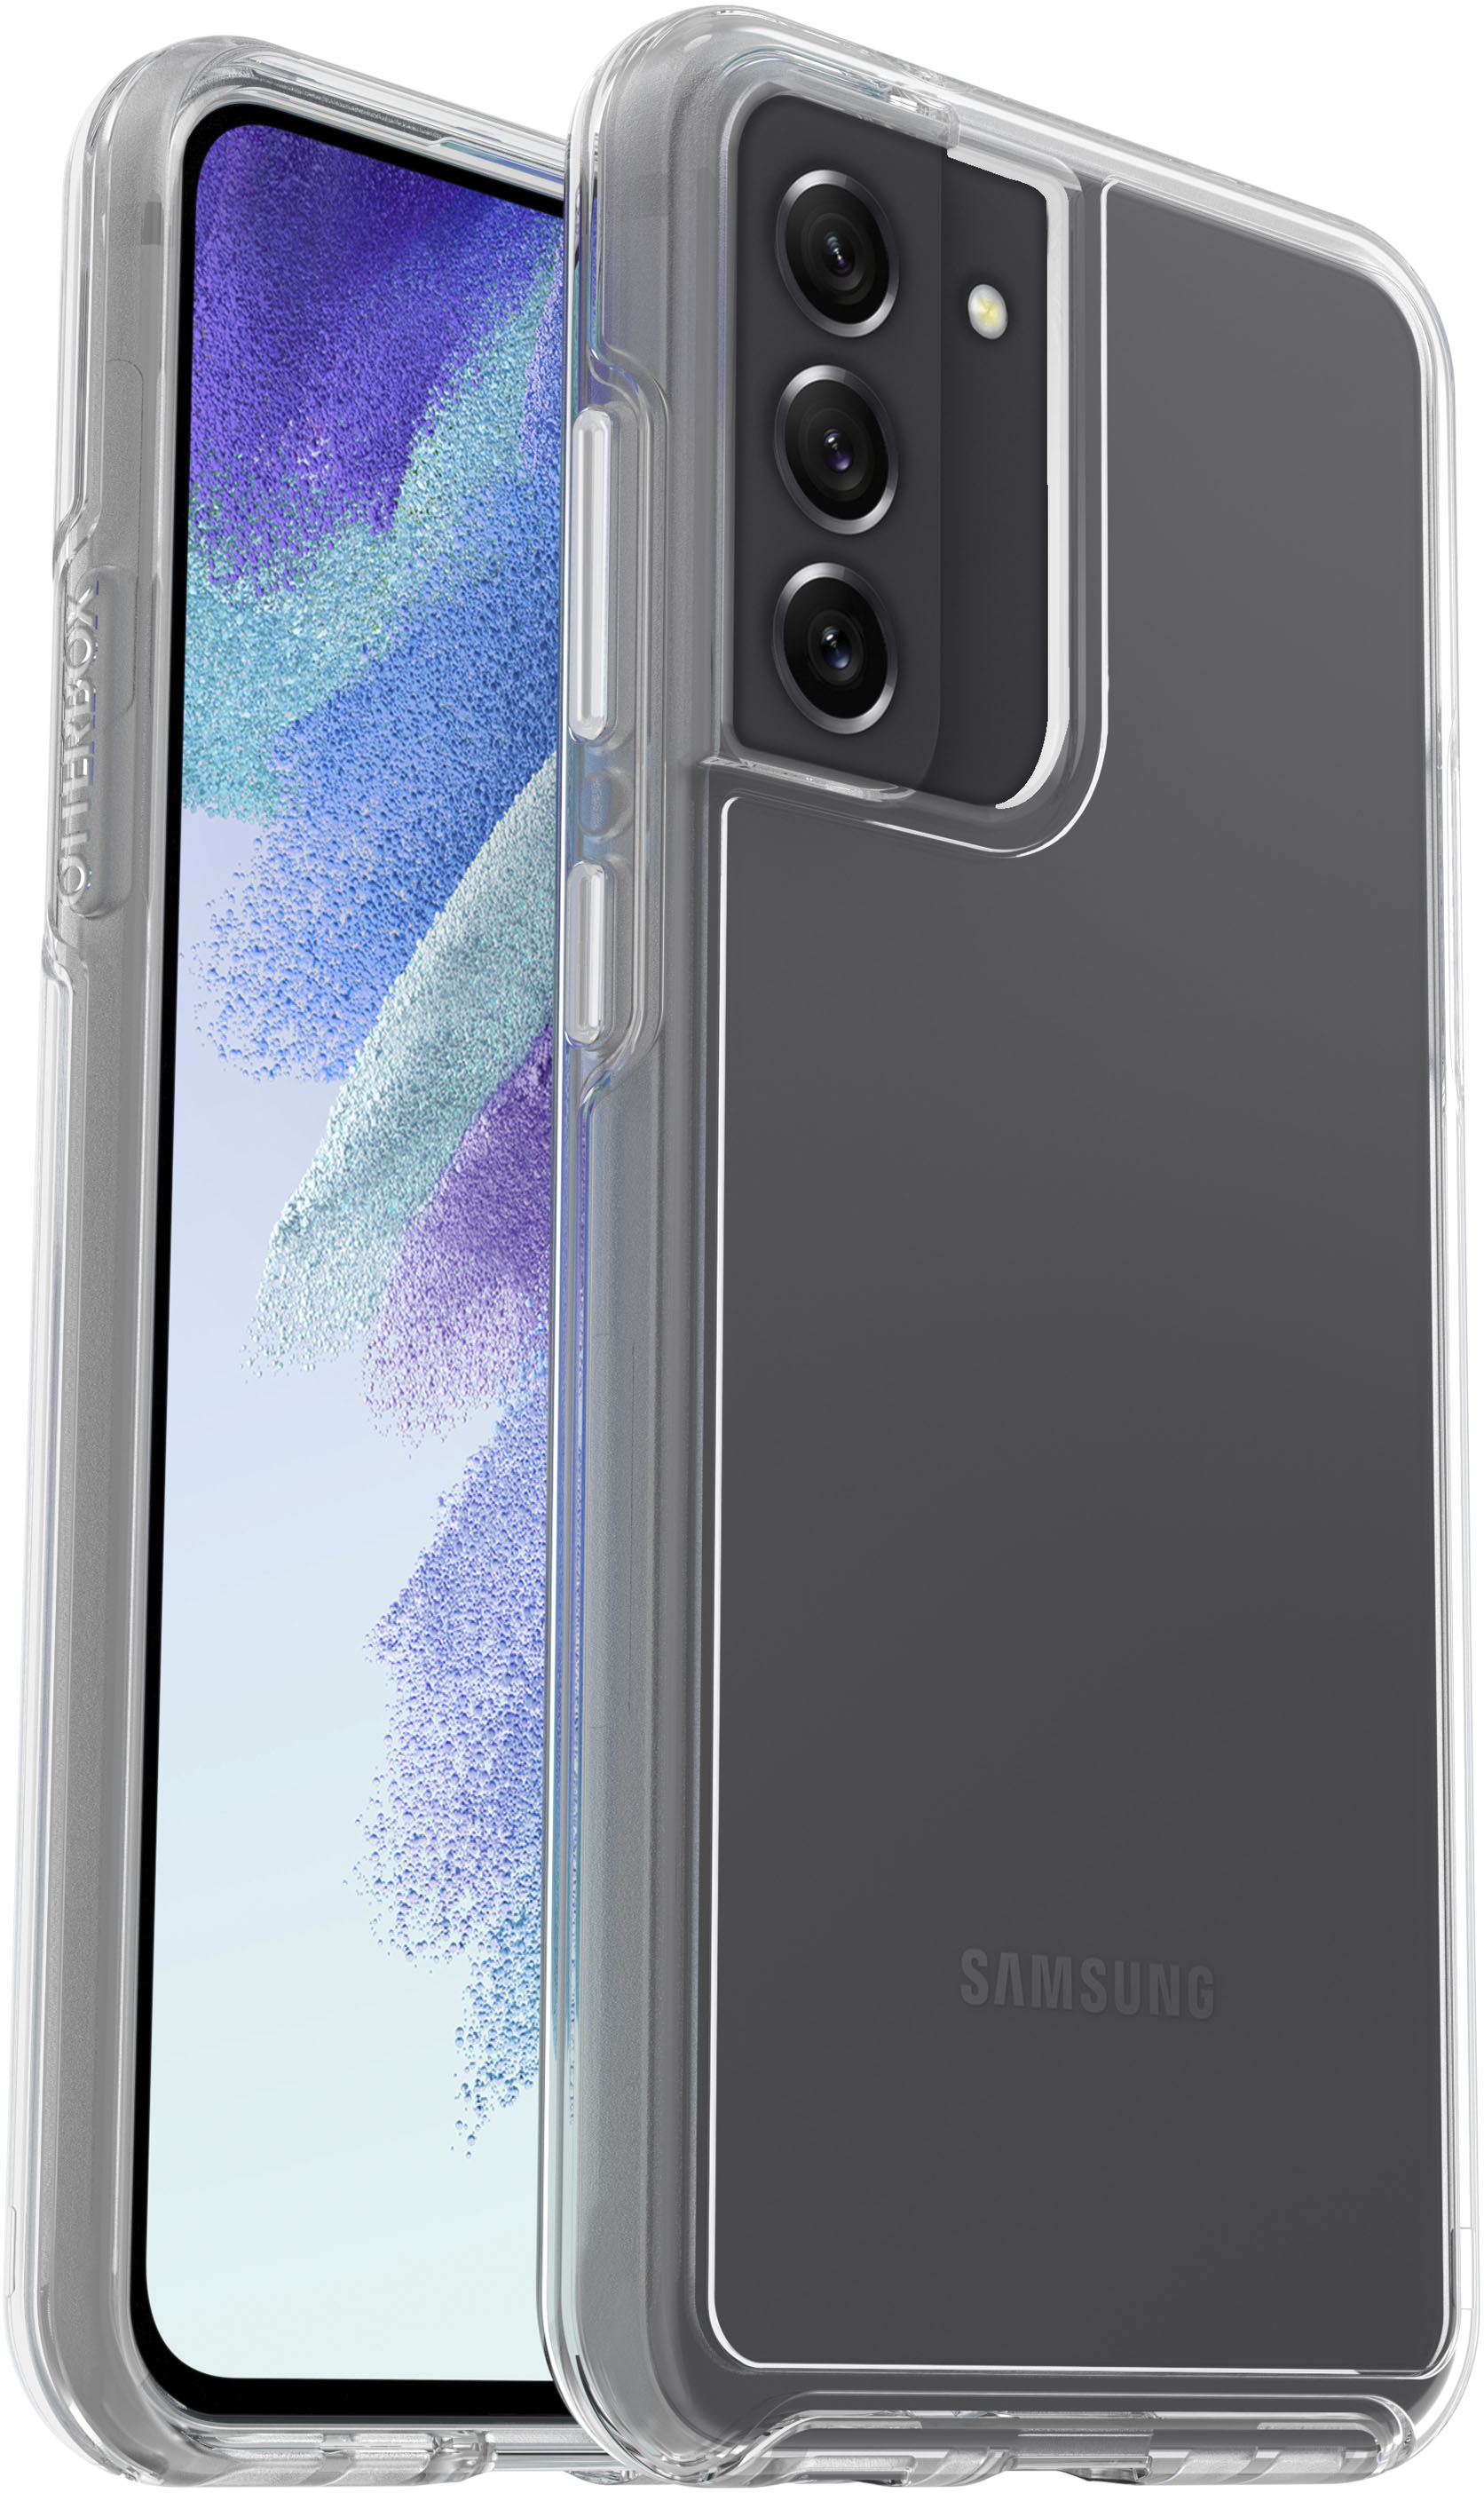 Angle View: OtterBox - Symmetry Clear Series Soft Shell for Samsung Galaxy S21 FE 5G - Clear